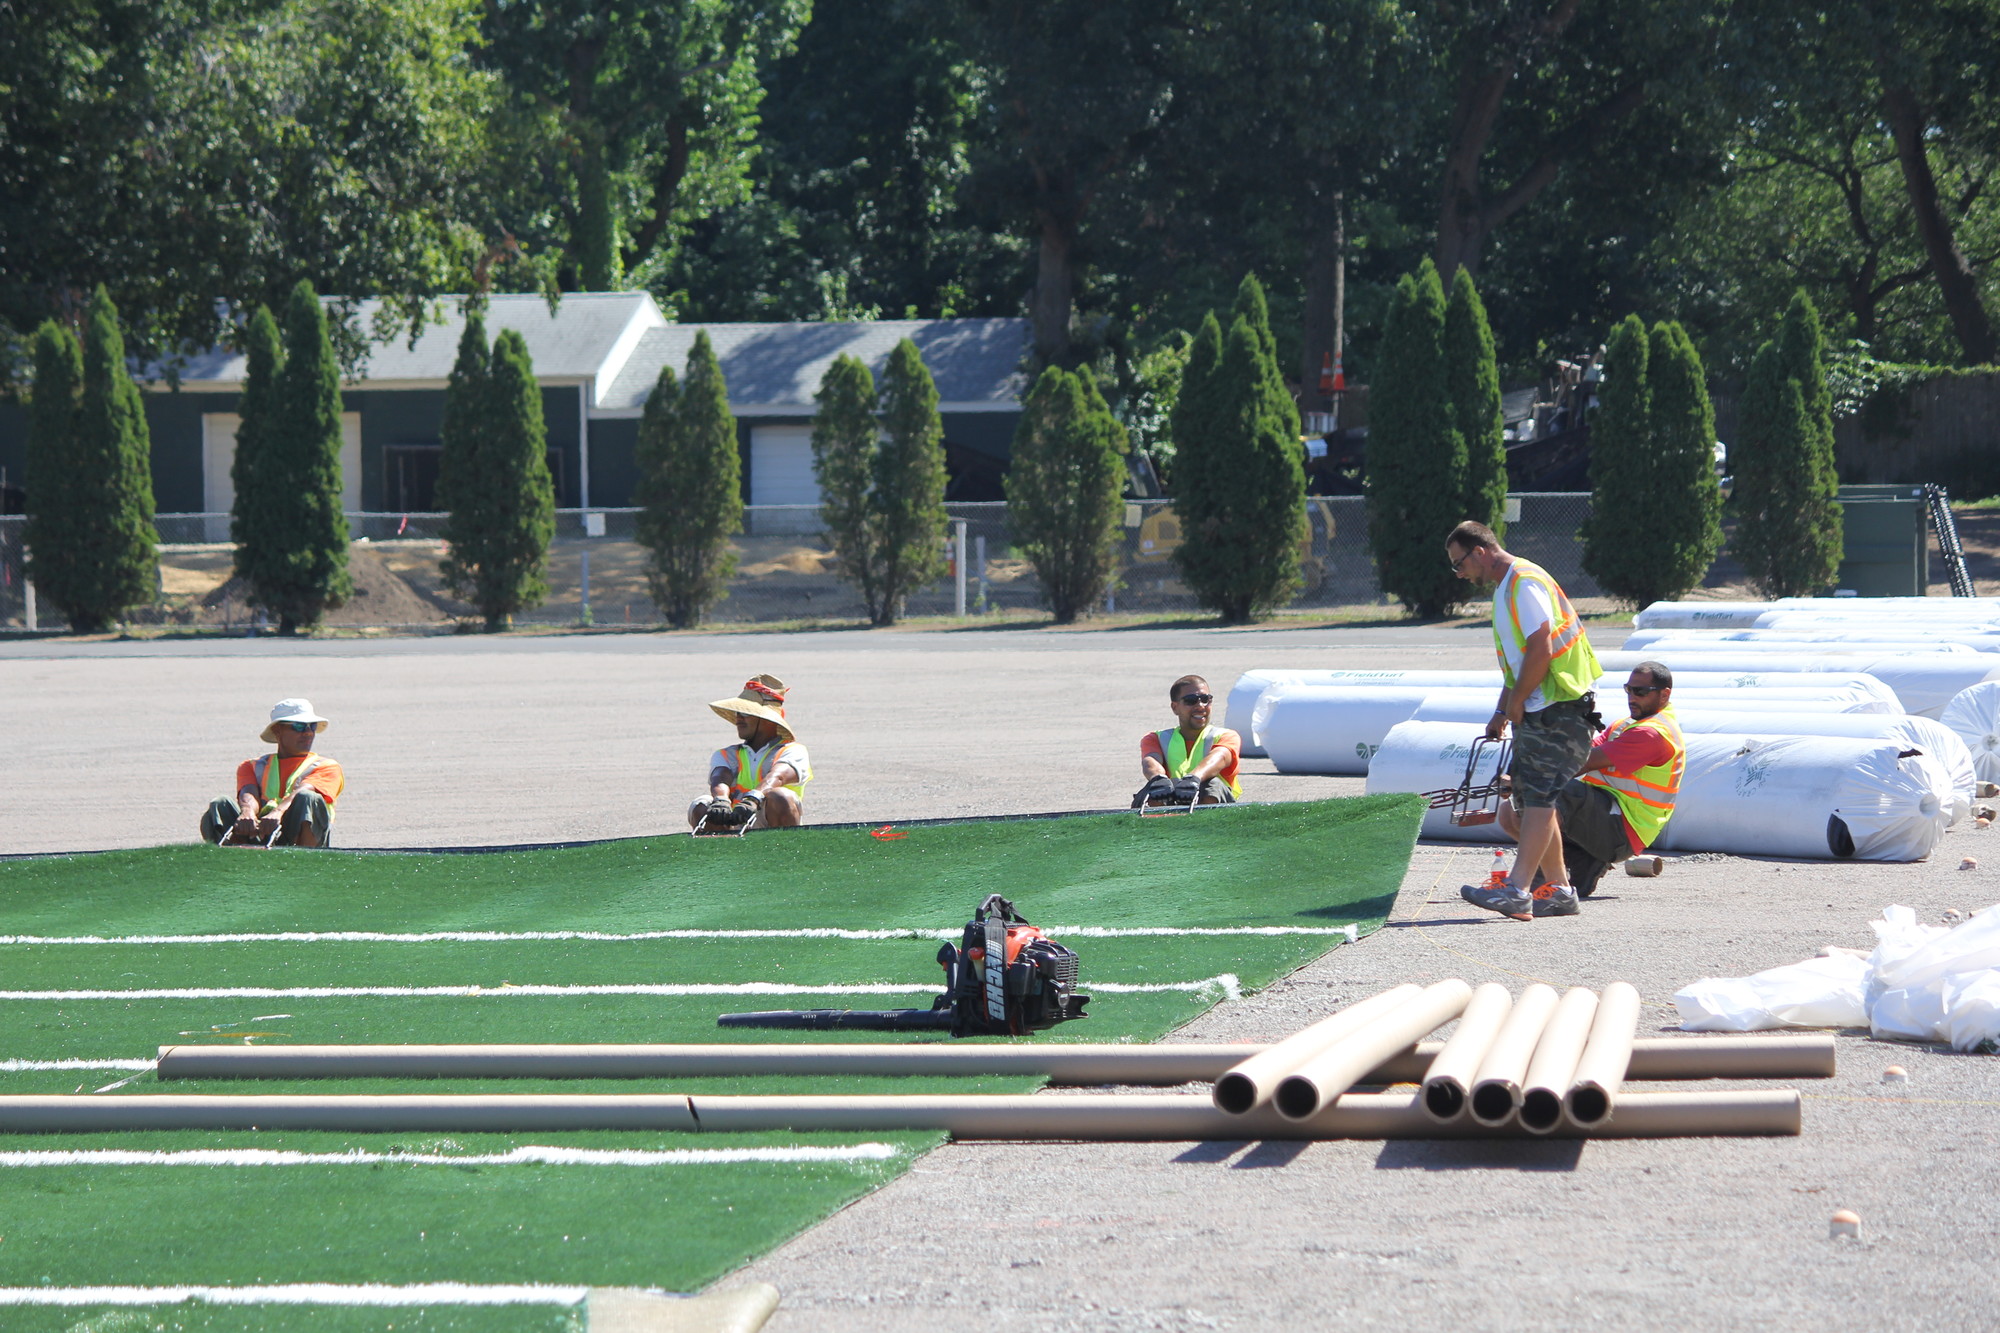 The synthetic turf field had to be rolled and stretched into place, much like a carpet.